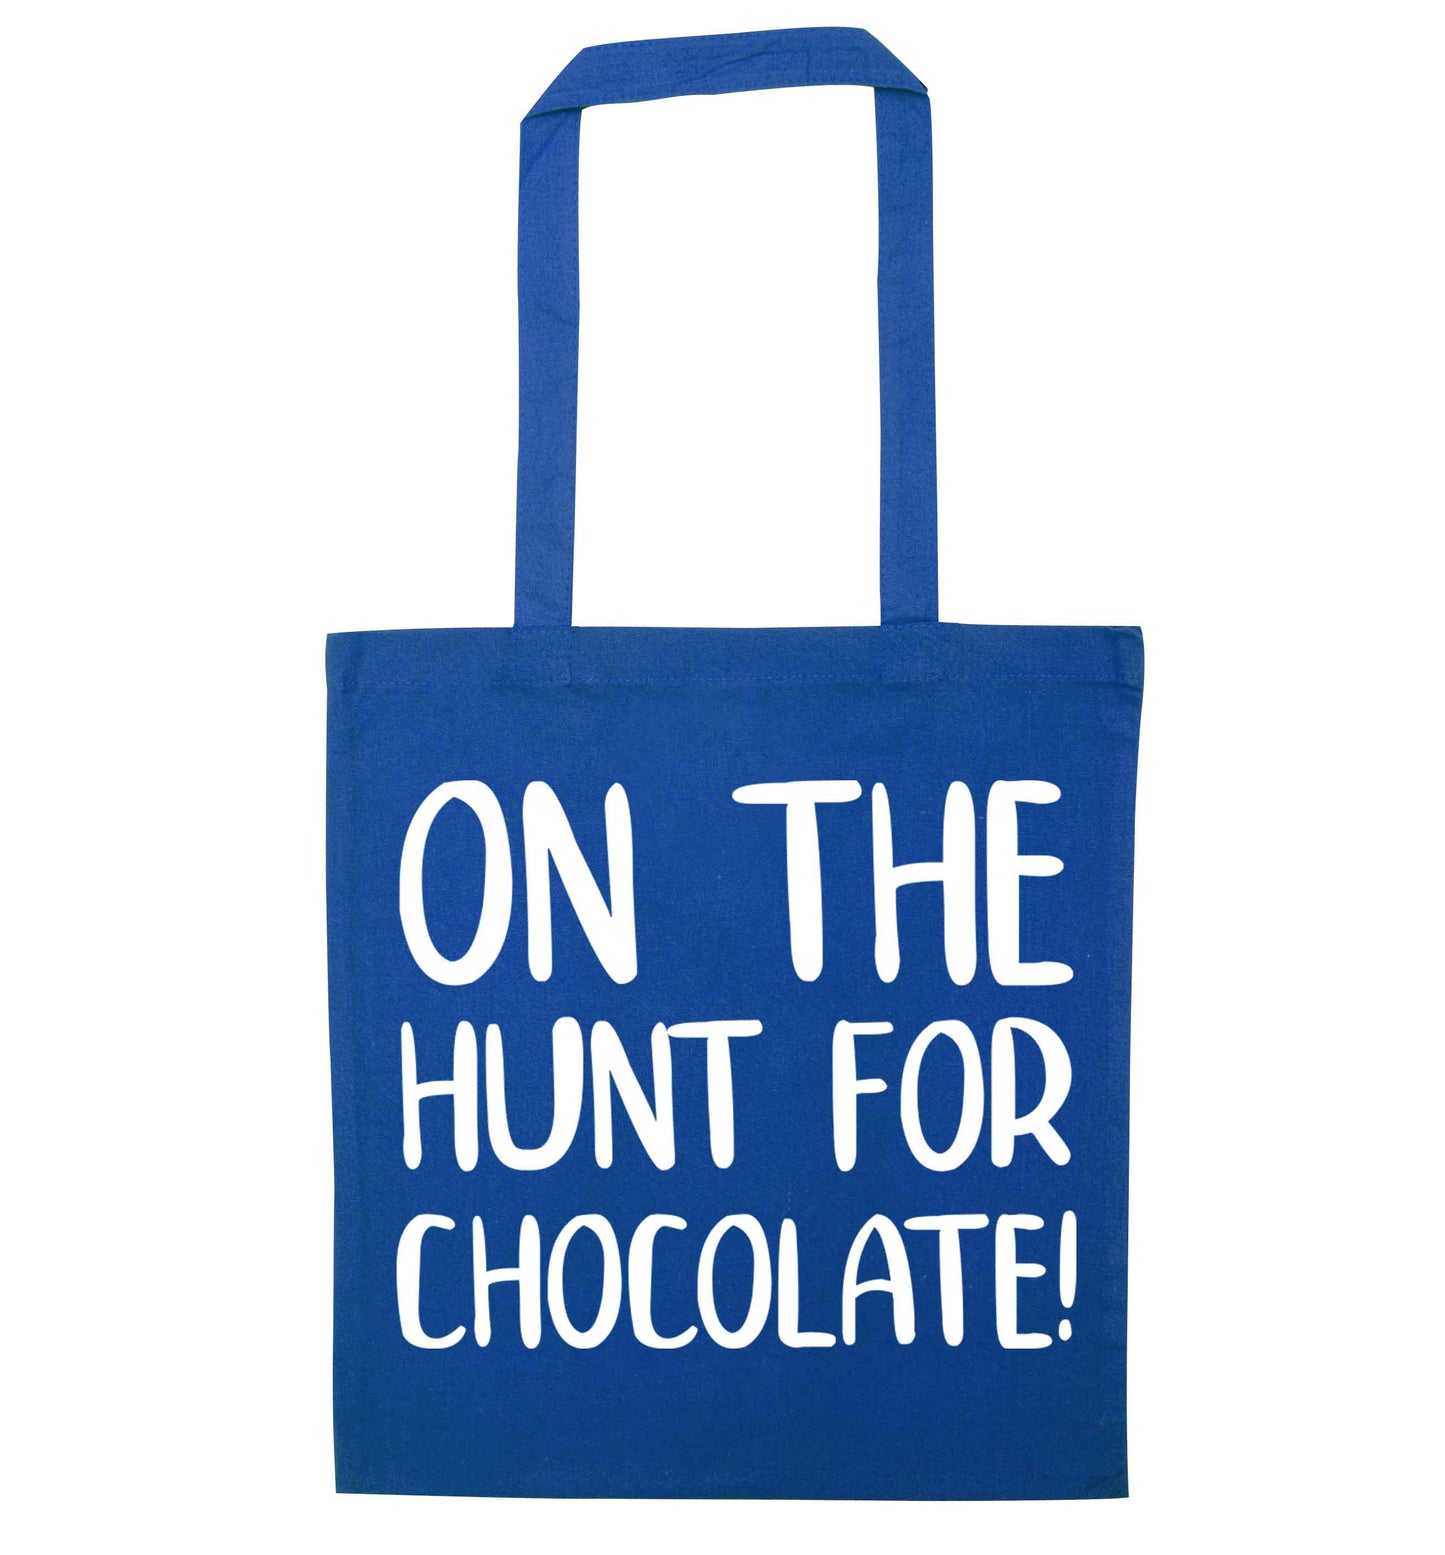 On the hunt for chocolate! blue tote bag